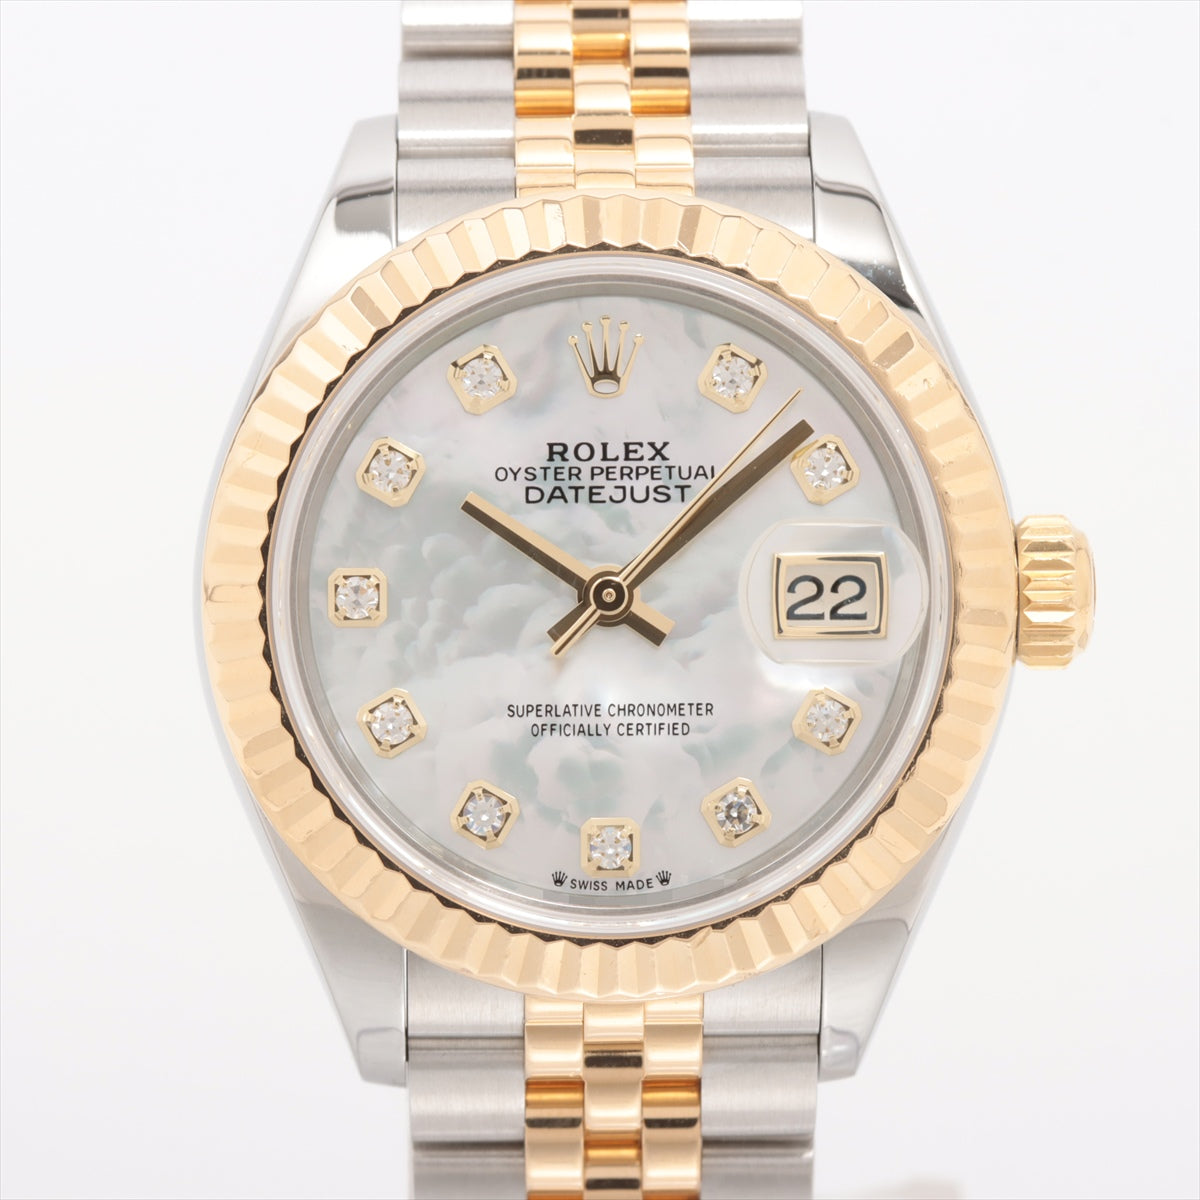 Rolex Datejust 279173NG SS×YG AT Shell Dial jubilee bracelet 1 Extra Link